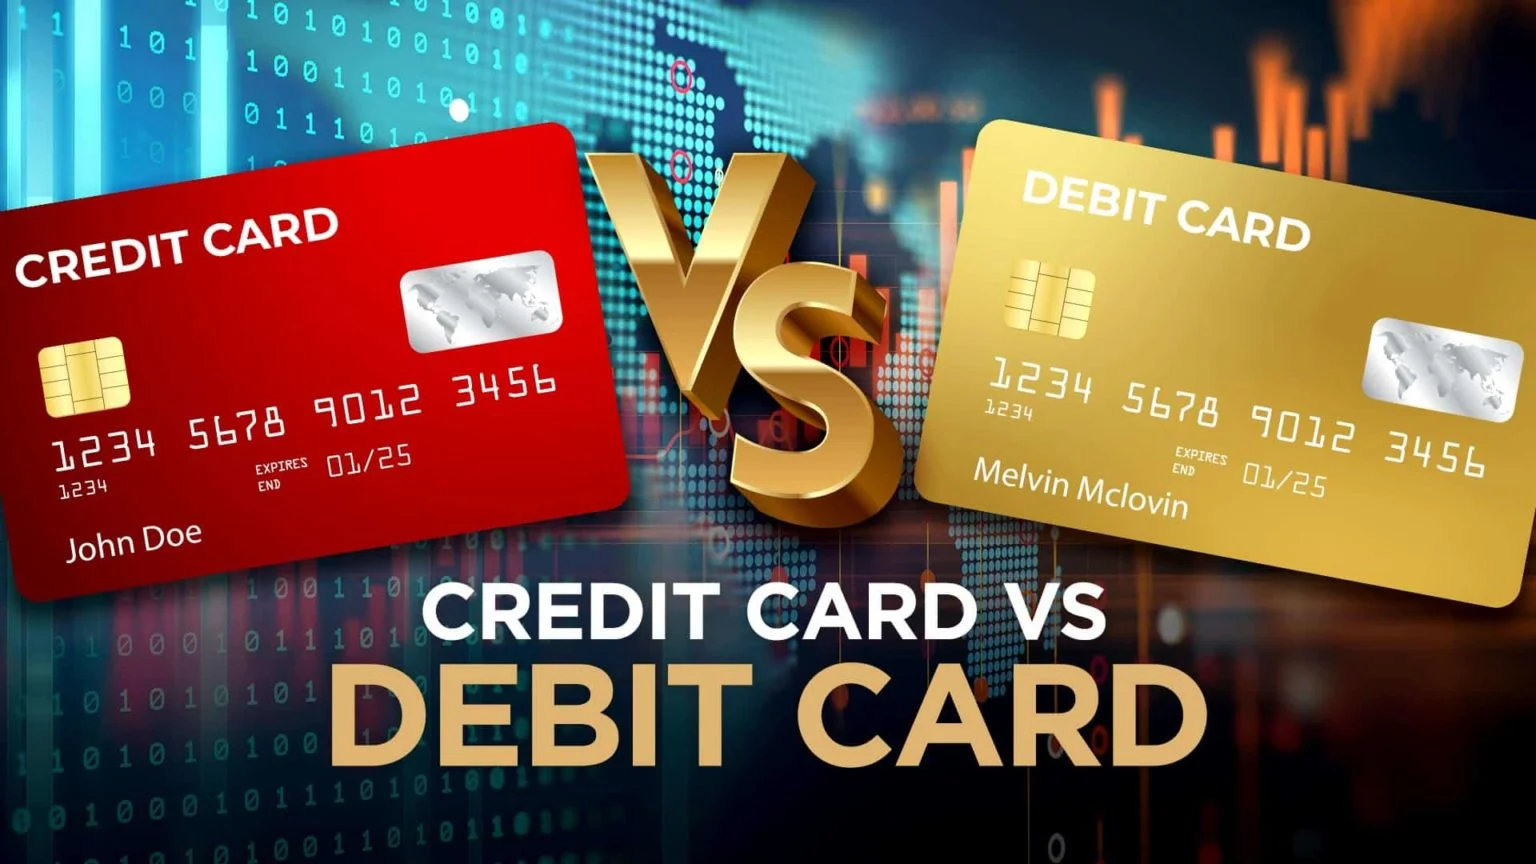 debit card and credit card